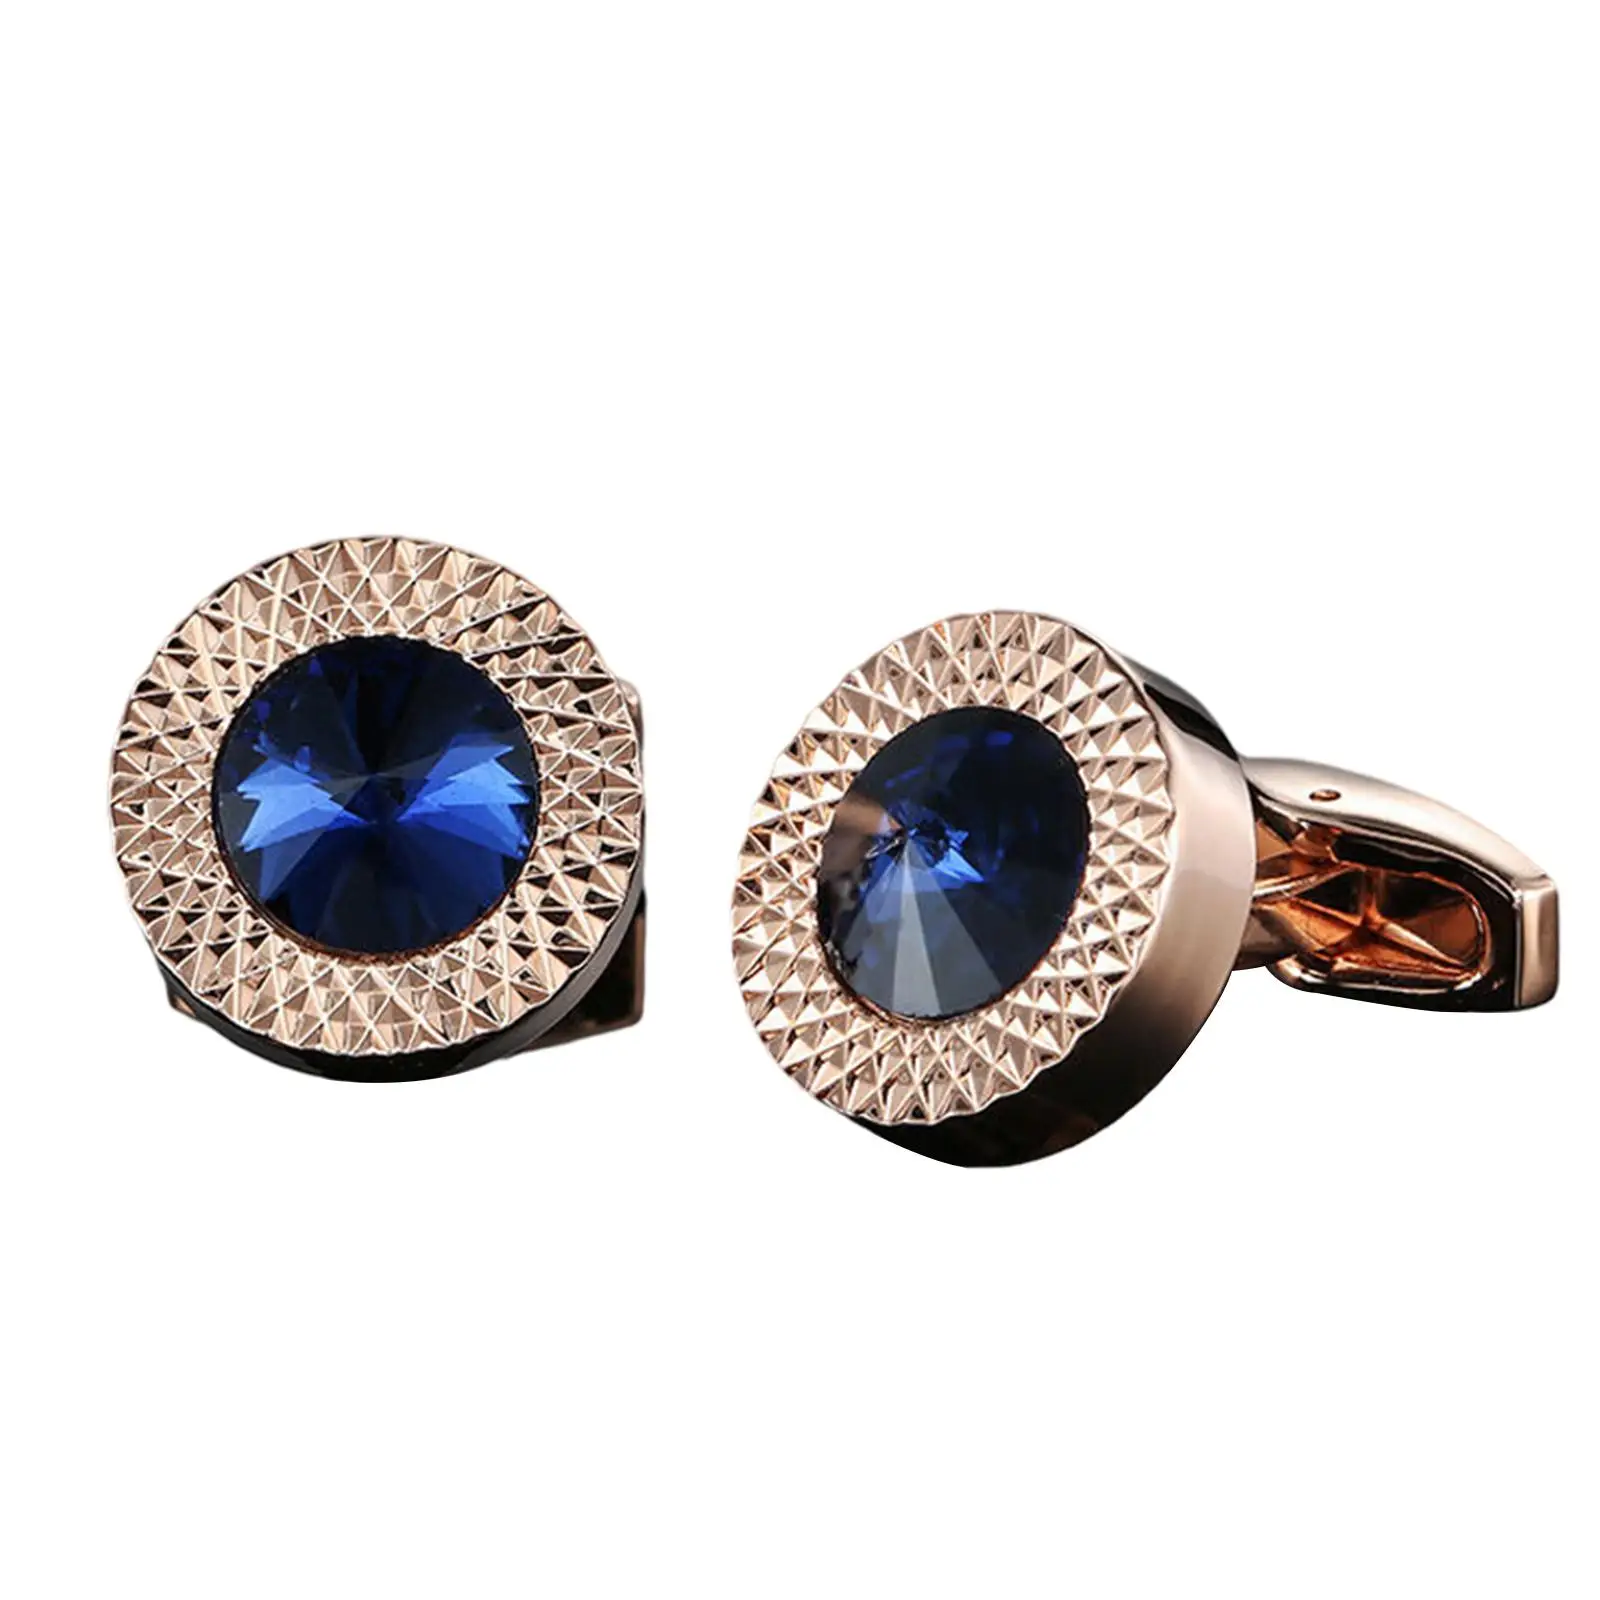 Mens Round Copper Crystal Shirts Cufflinks Shiny Business Wedding Present Perfect Accessory